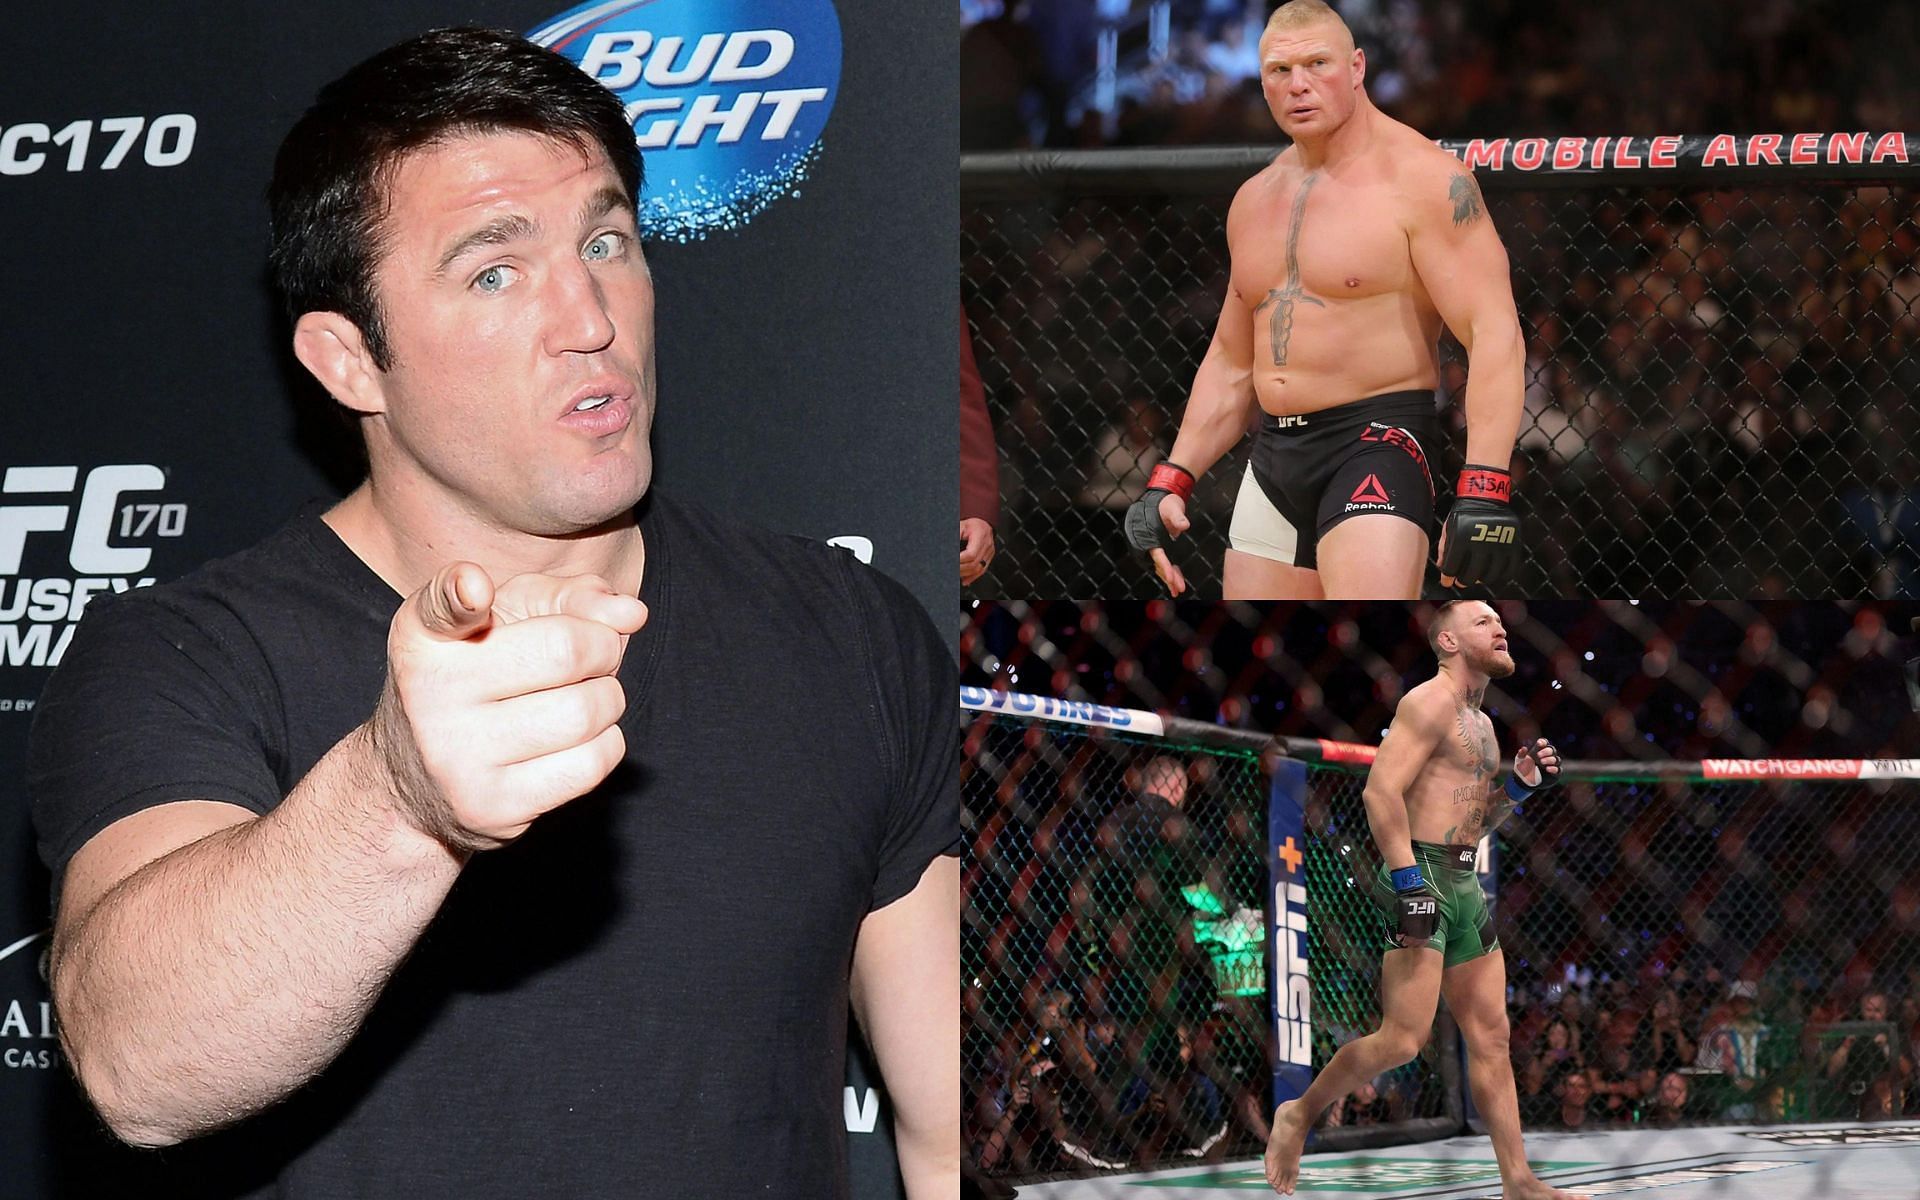 Chael Sonnen (left), Brock Lesnar (top right), and Conor McGregor (bottom right) [Images courtesy of Getty]